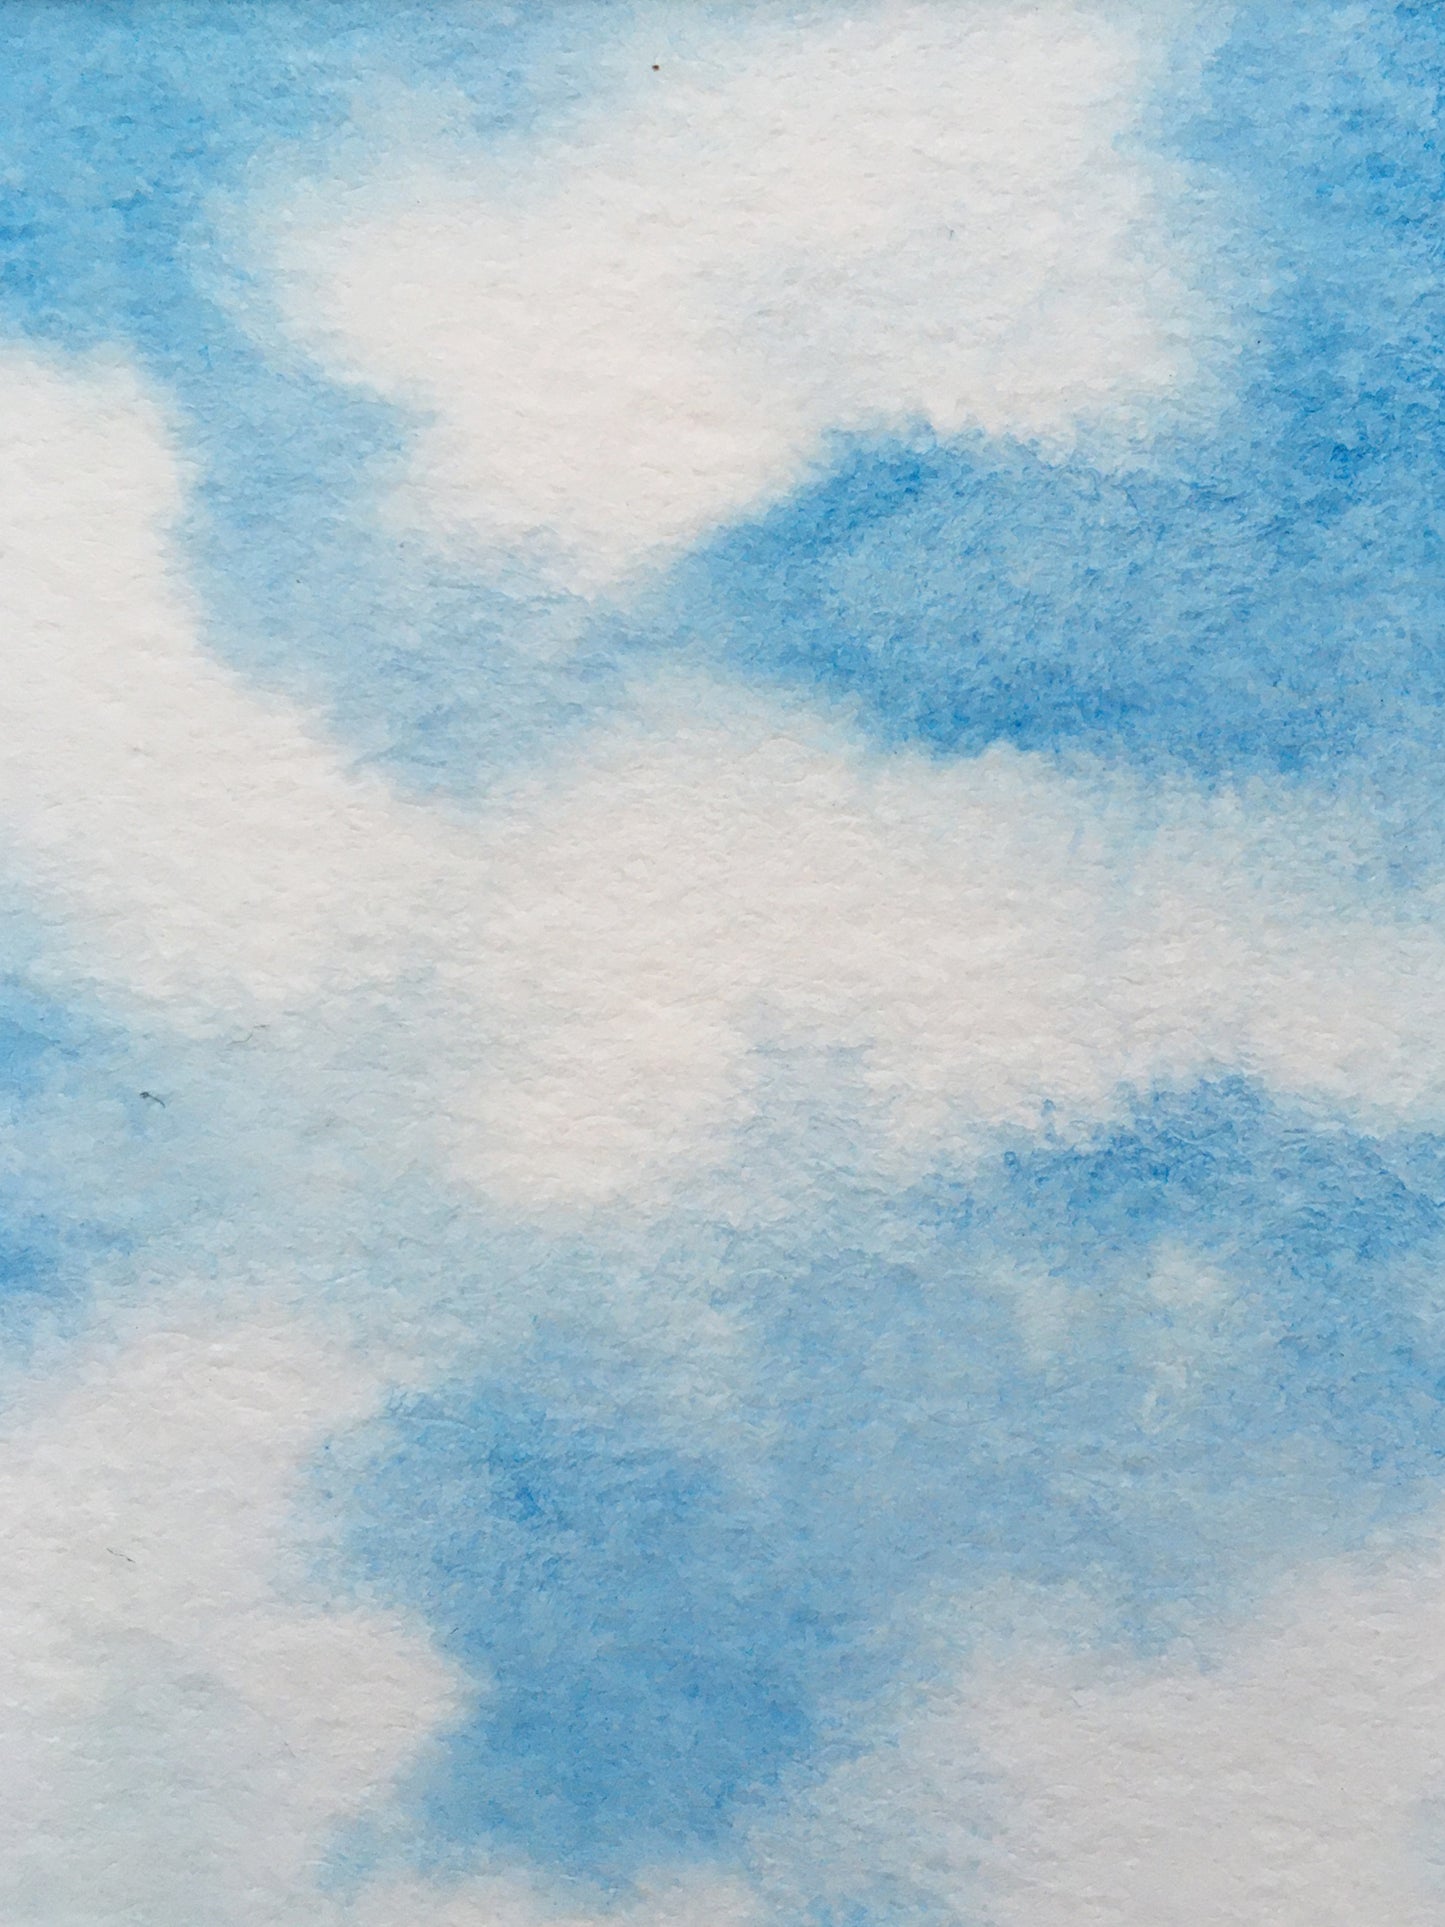 Look Up At The Clouds | No. 1 - Original Watercolor Painting